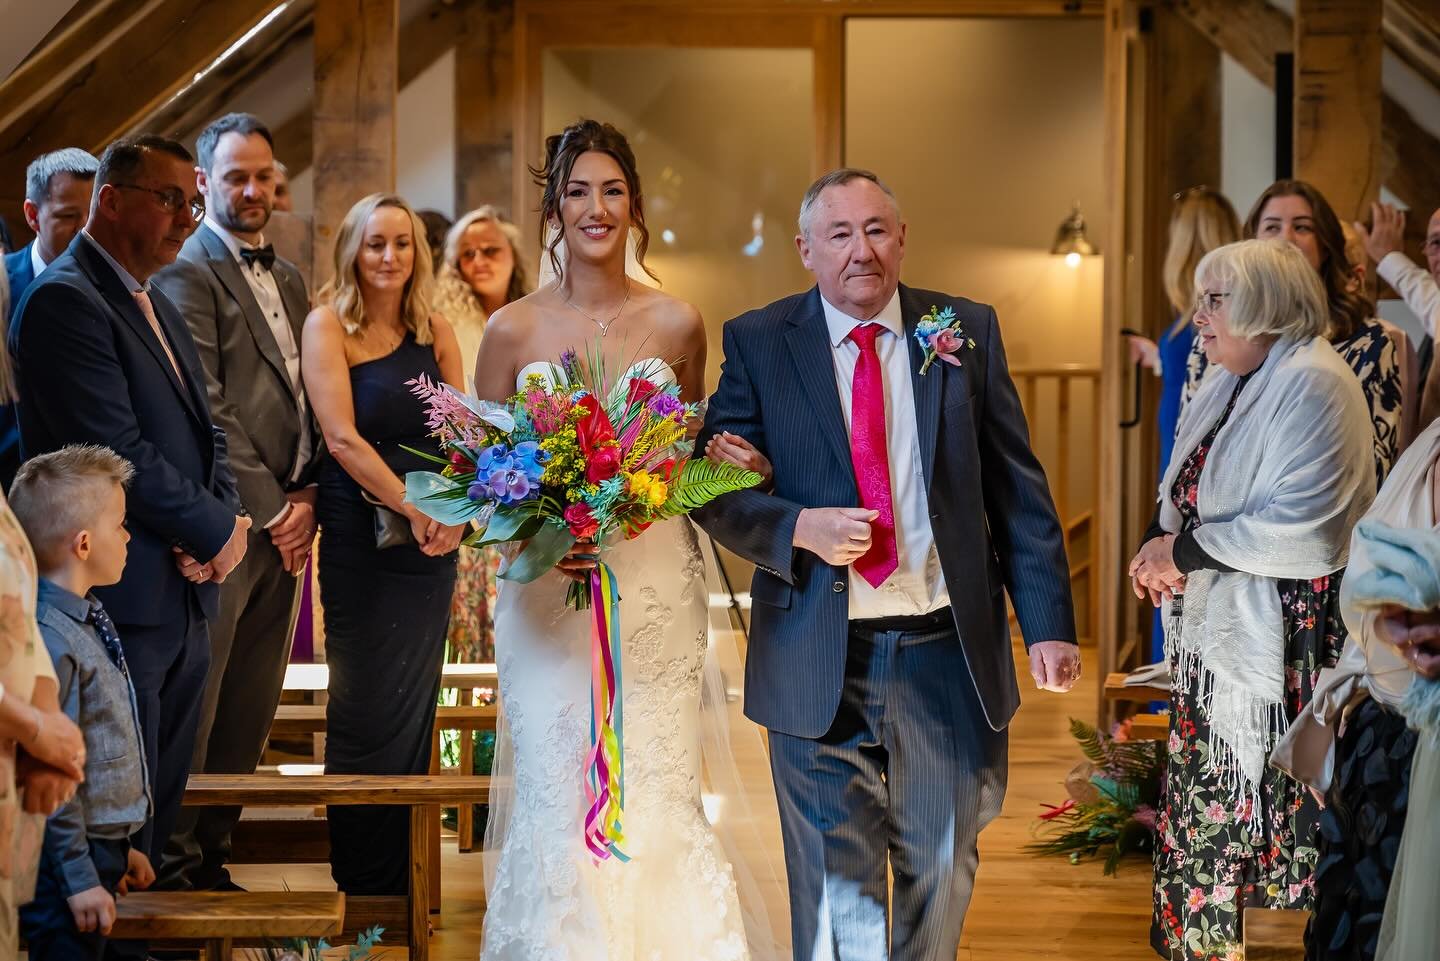 This pair, and their fabulous guests, kept Lily and myself happily busy by being generally gorgeous and fun all day on Saturday over at @moathallbarns oh and if that sunny weather can stay for all my weddings this year, that&rsquo;d be lovely too!

B